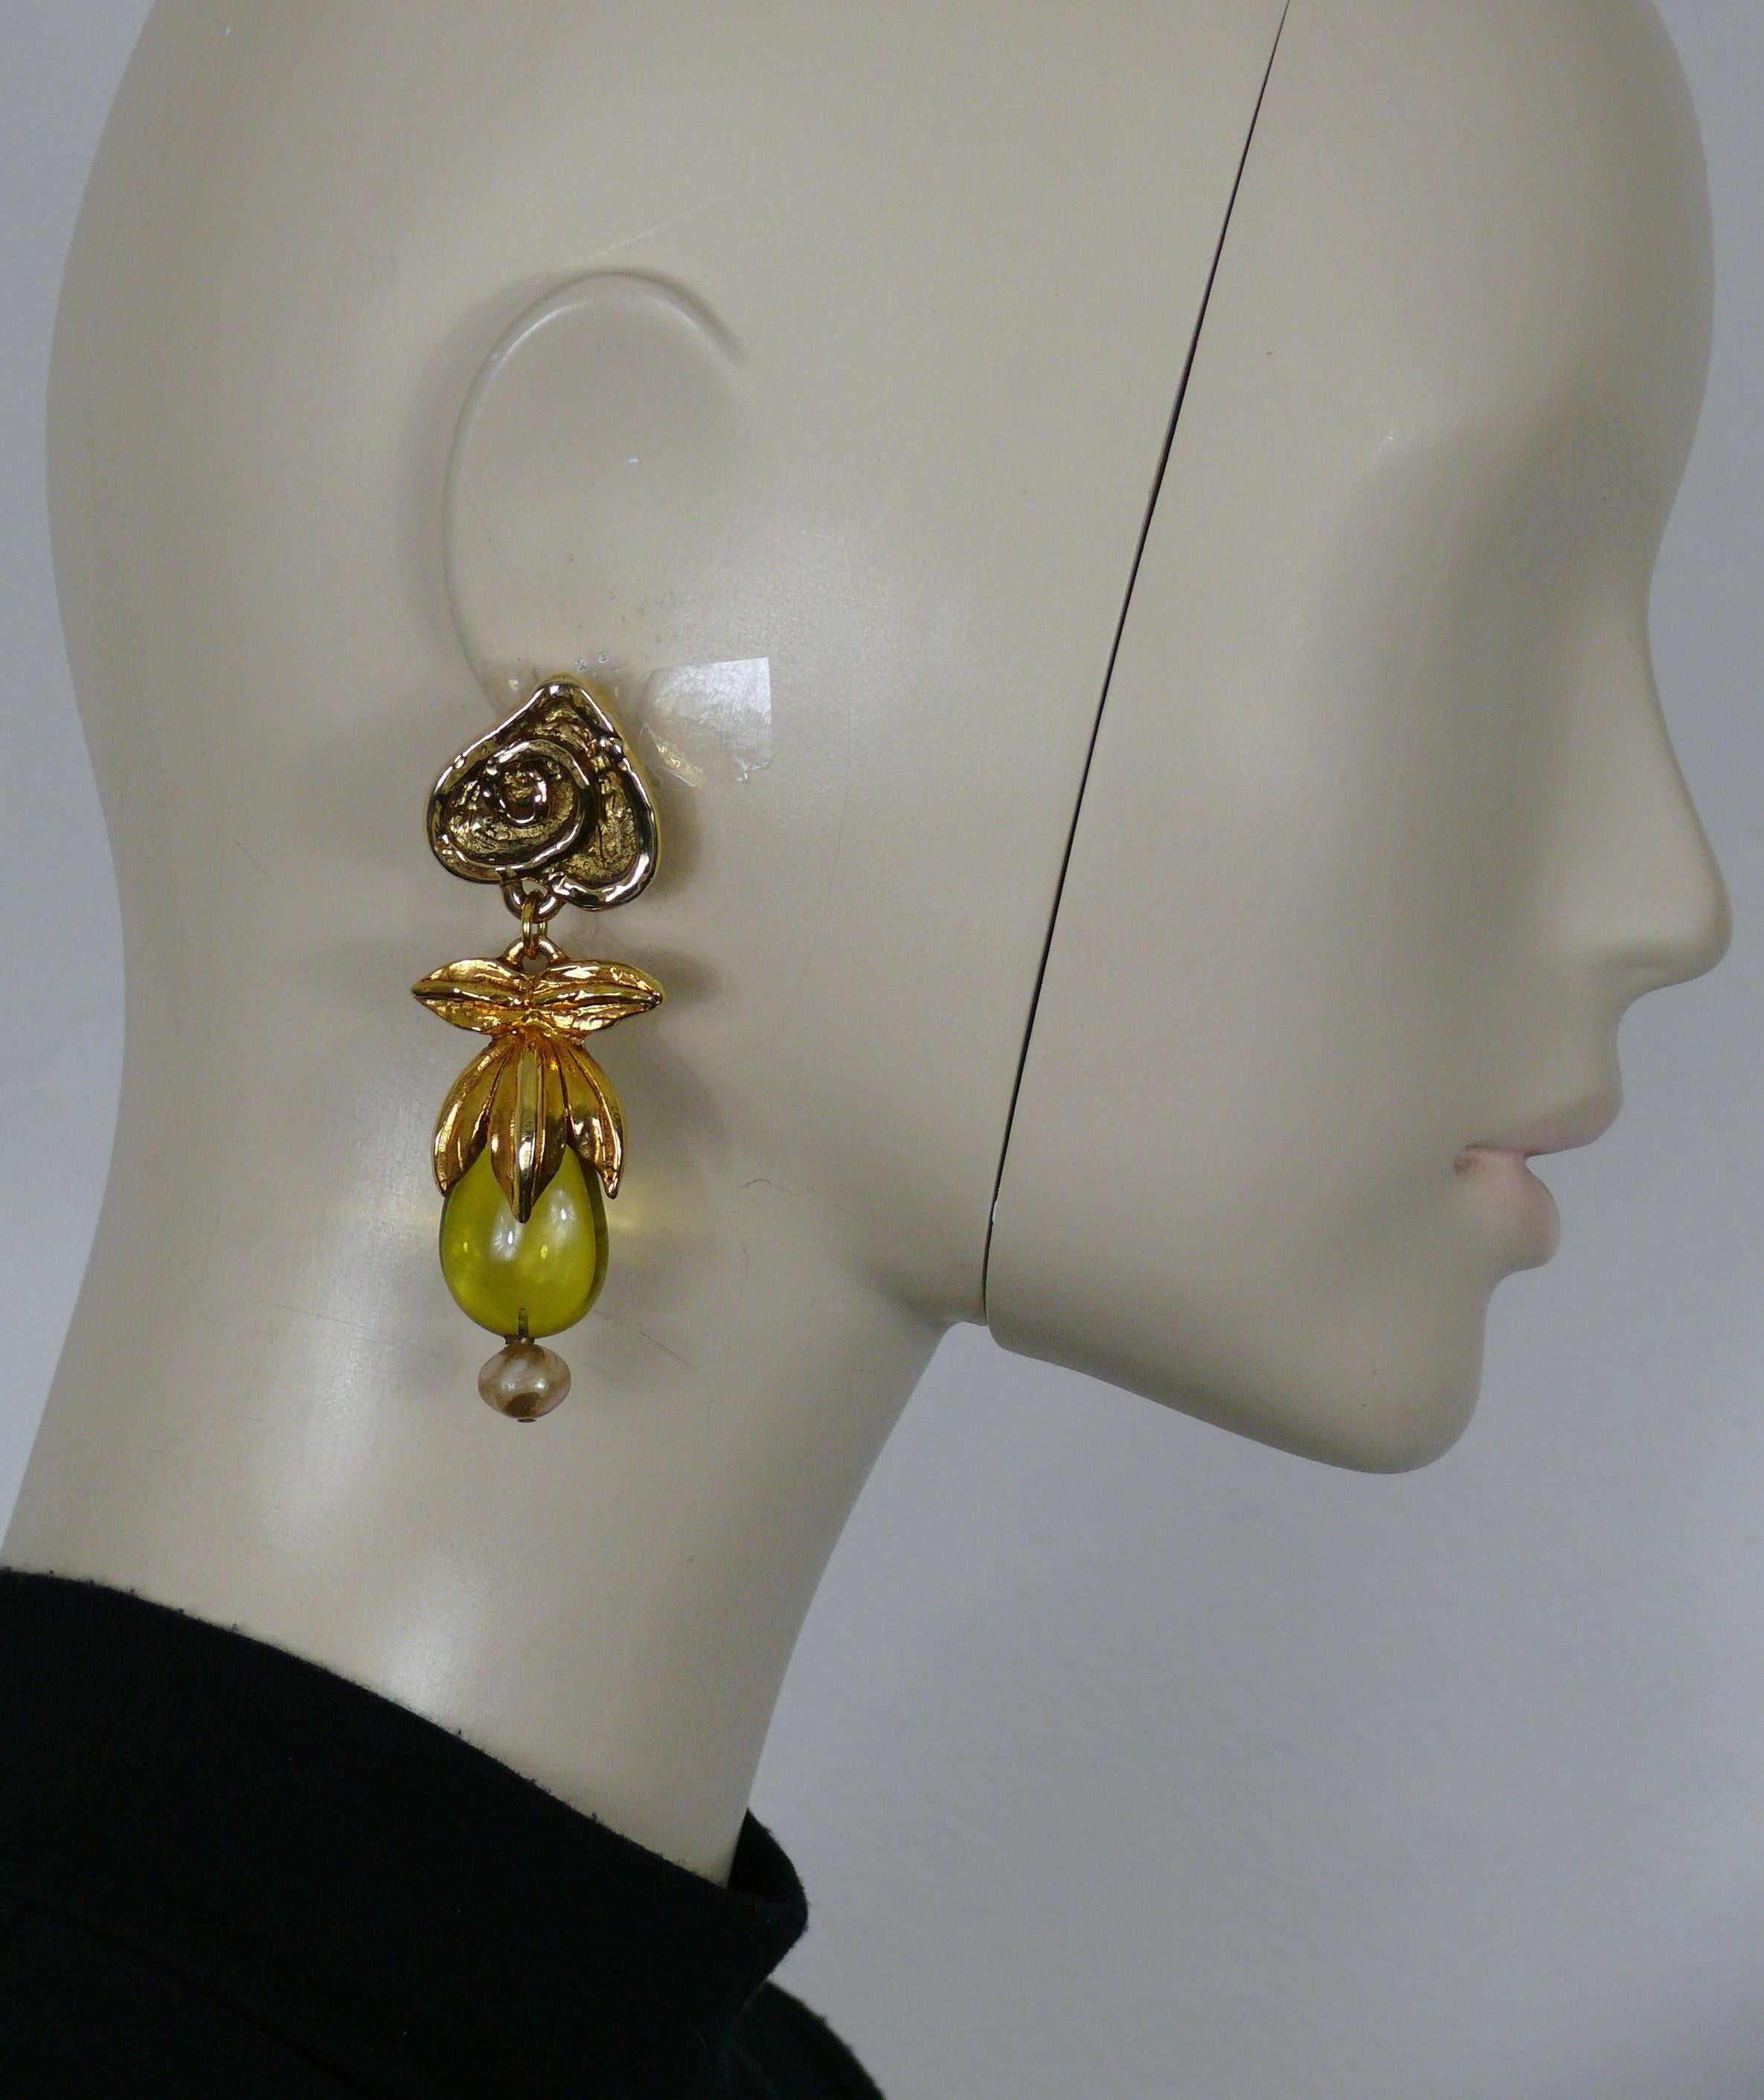 RENA LANGE vintage gold tone resin dangling earrings (clip-on) featuring a resin drop and faux pearl.

Marked RENA LANGE Made in France. 

Indicative measurements : height approx. 7.6 cm (2.99 inches) / max. width approx. 2.4 cm (0.94 inch).

Weight